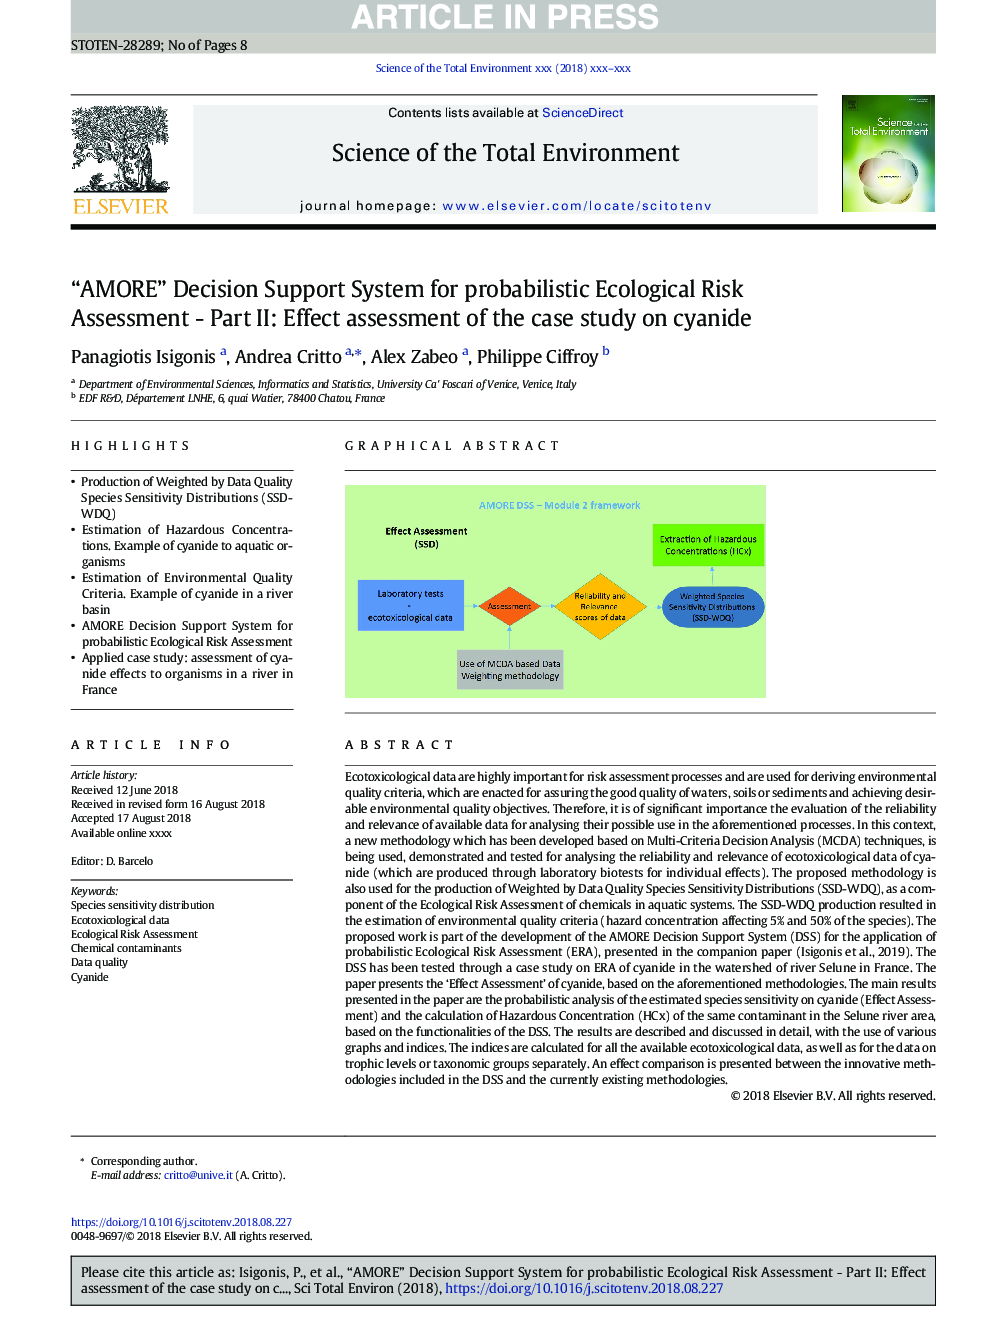 “AMORE” Decision Support System for probabilistic Ecological Risk Assessment - Part II: Effect assessment of the case study on cyanide